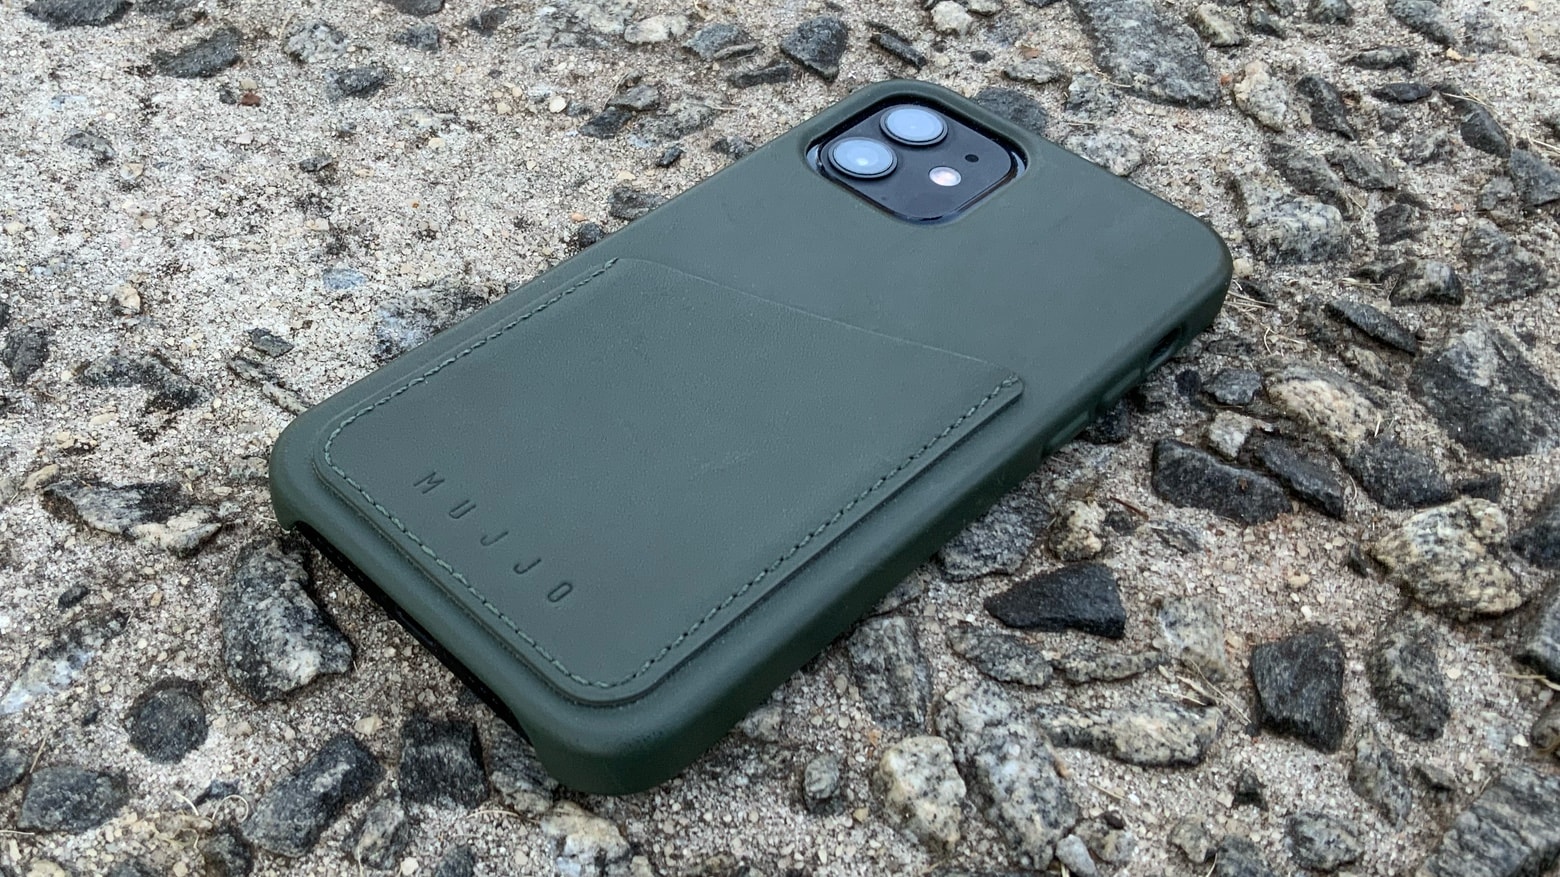 Mujjo Full Leather Wallet Case for iPhone 12 review: Elegant and practical